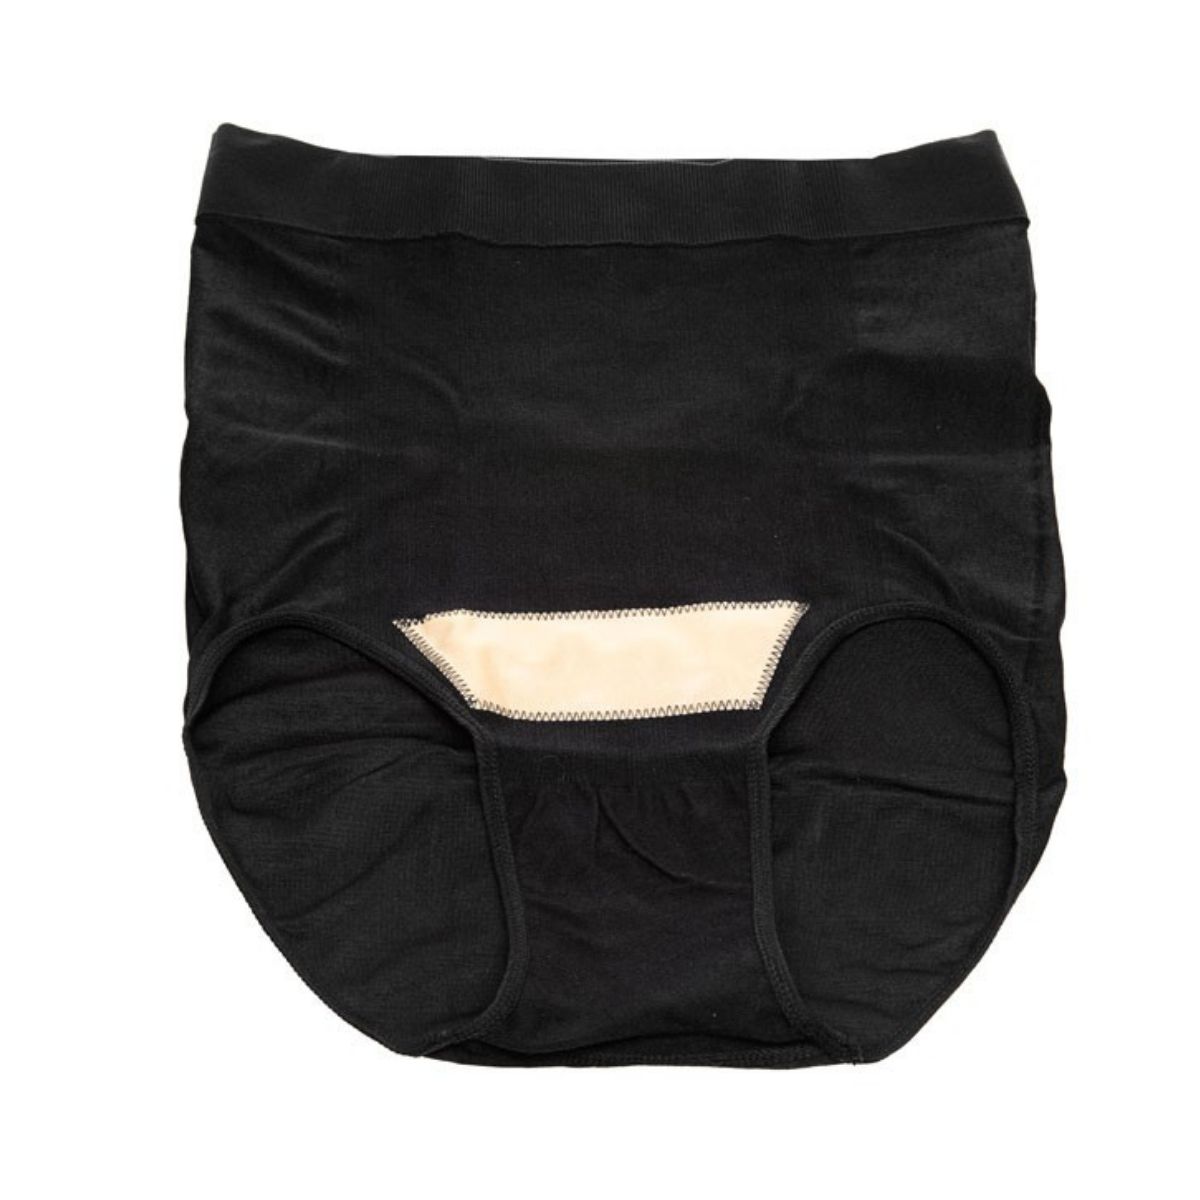 UpSpring C-Panty High Waist C-Section Recovery Panty - 2 Pack (1